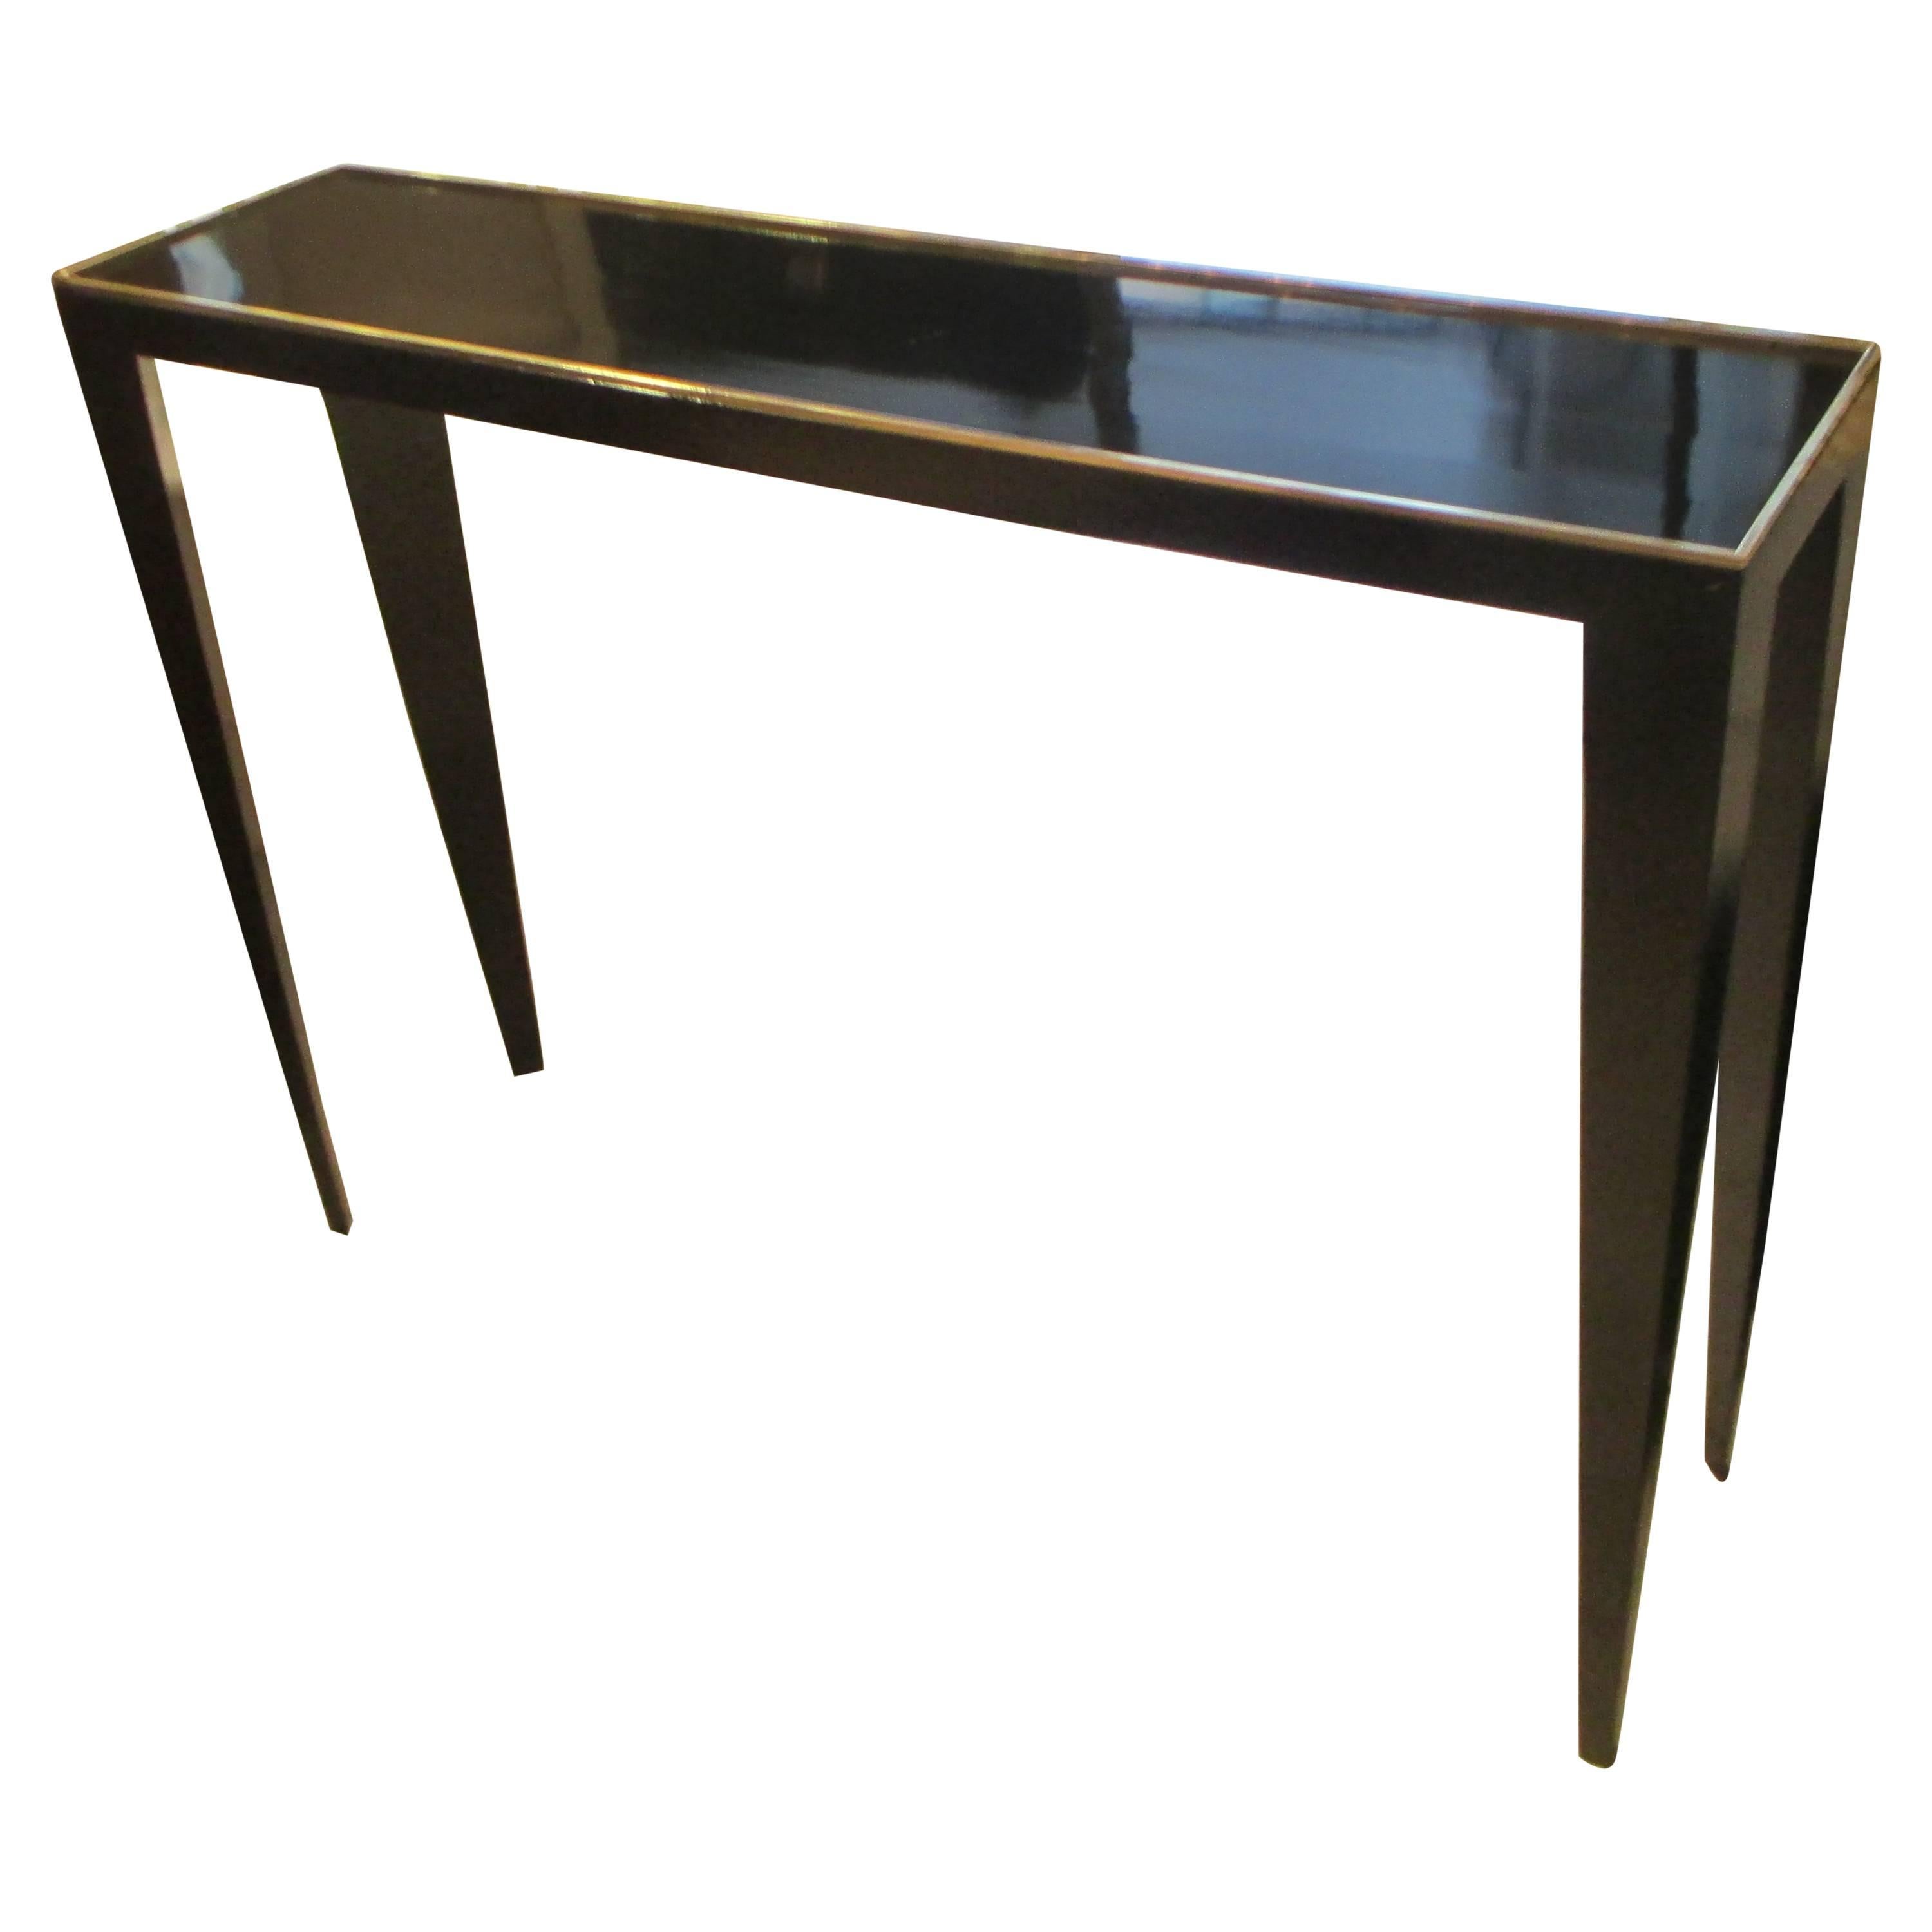 Sculptural Modern Lacquered Console Table with Bronze Gallery